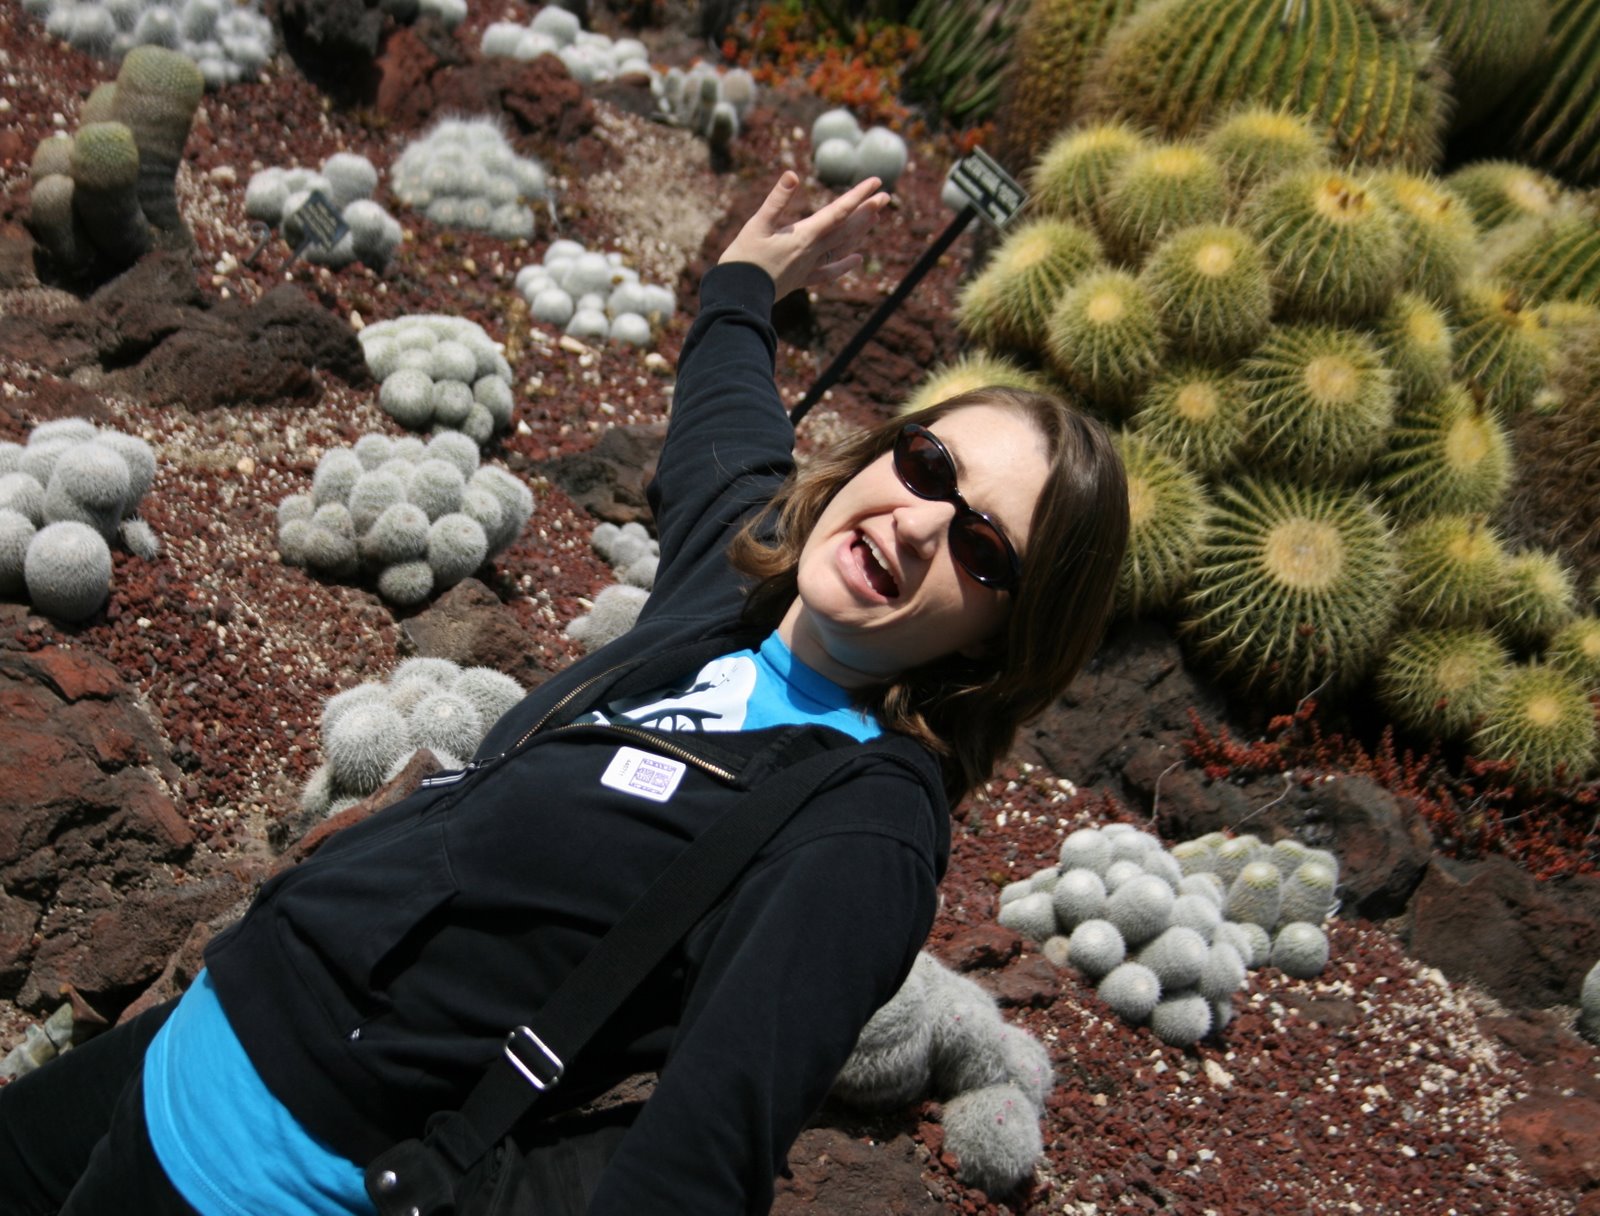 [gigi+cacti+look+but+dont+touch.jpg]